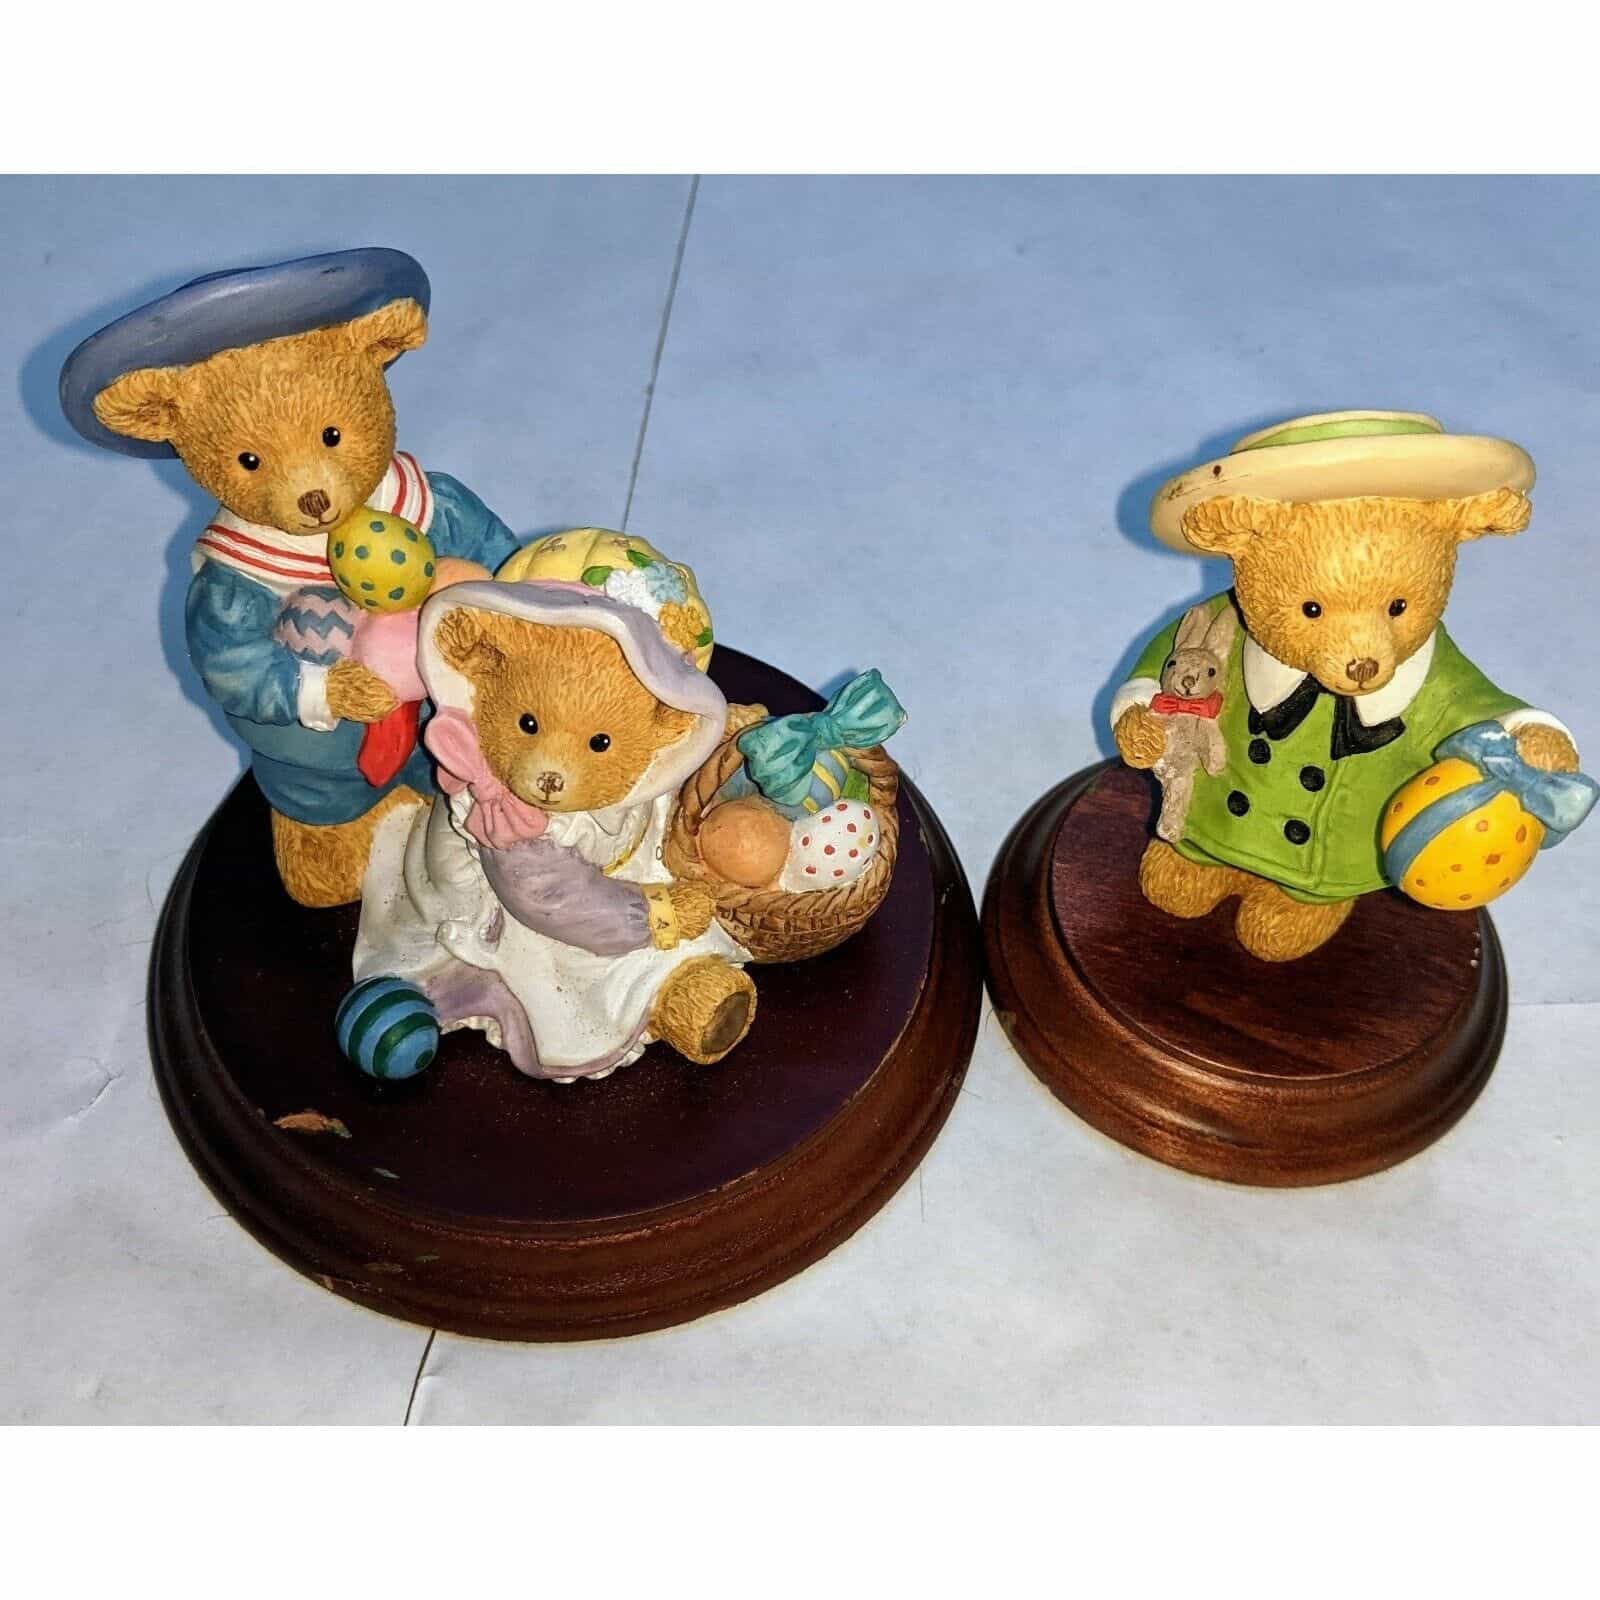 Department 56 Upstairs Downstairs Bears Set of Easter Themed